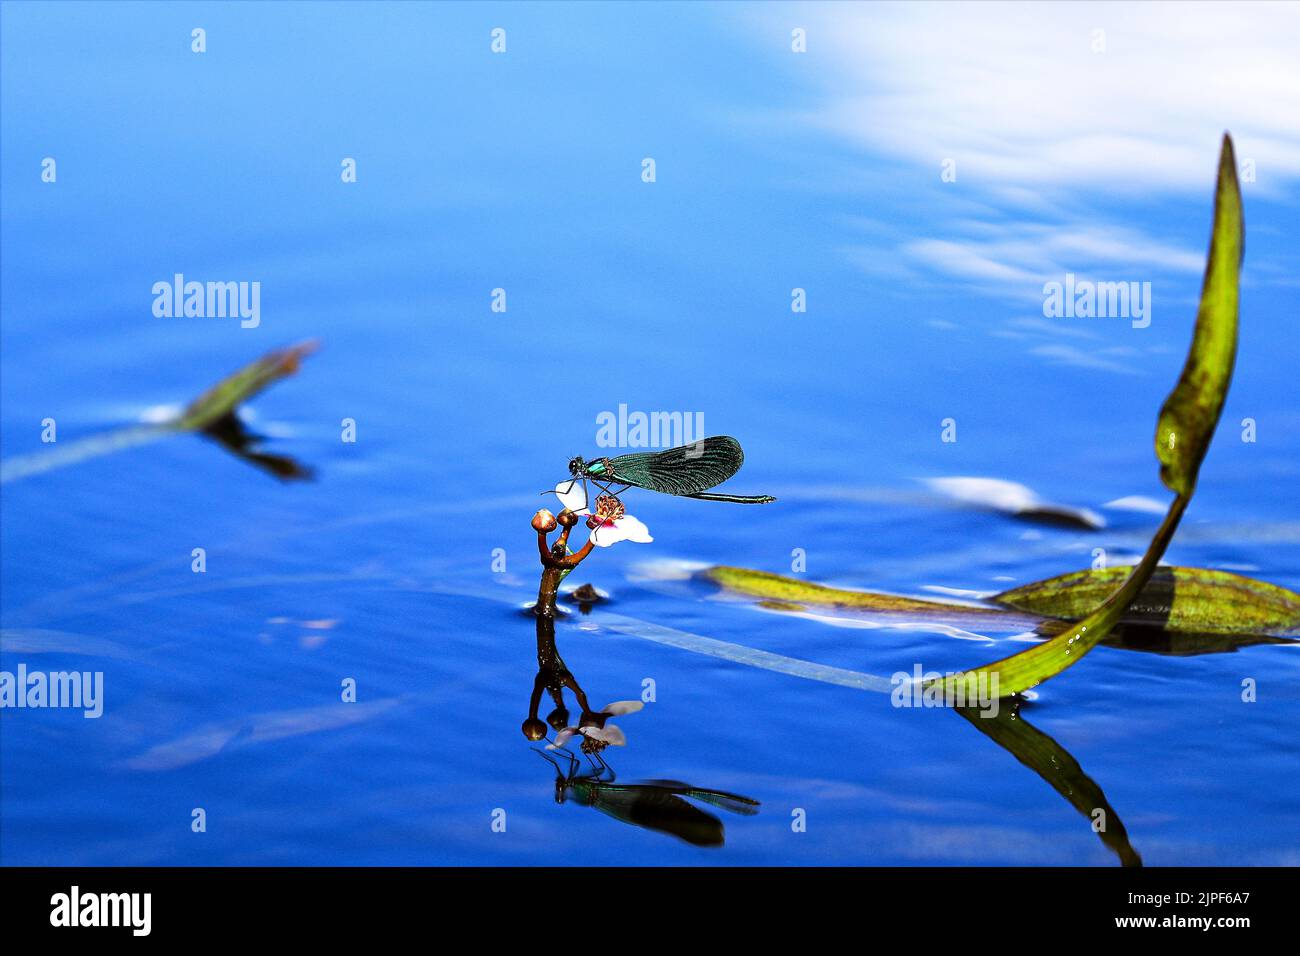 Turquoise dragonfly seat on white flower above water surface close-up. Stock Photo